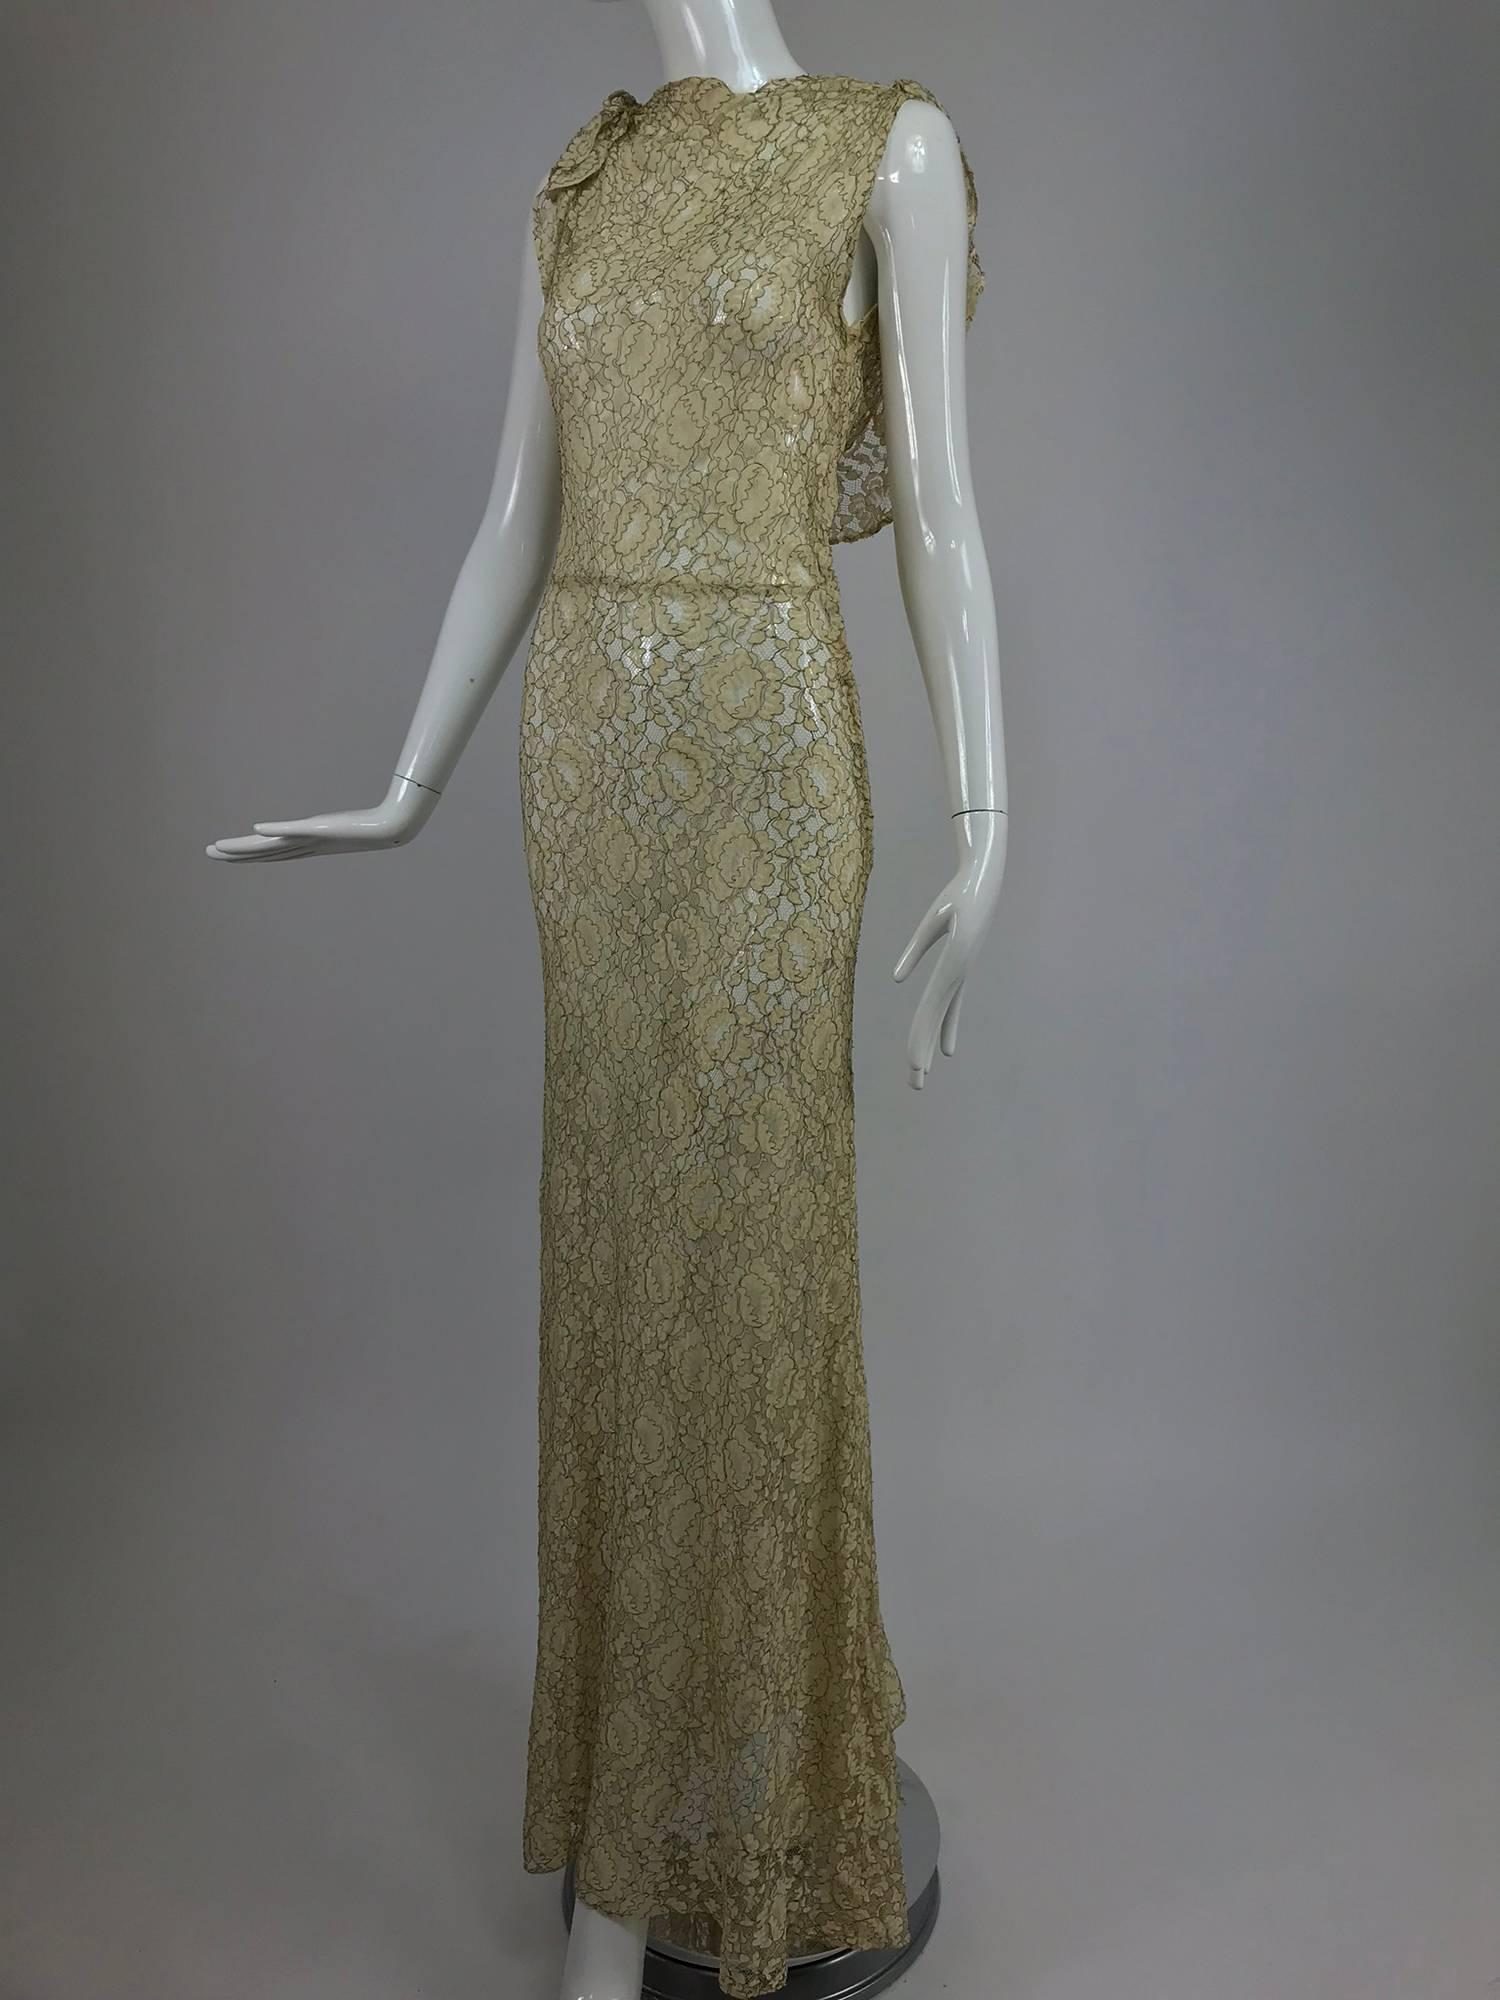 1930s Mixed Gold Metallic and Cream Lace Evening Dress 1